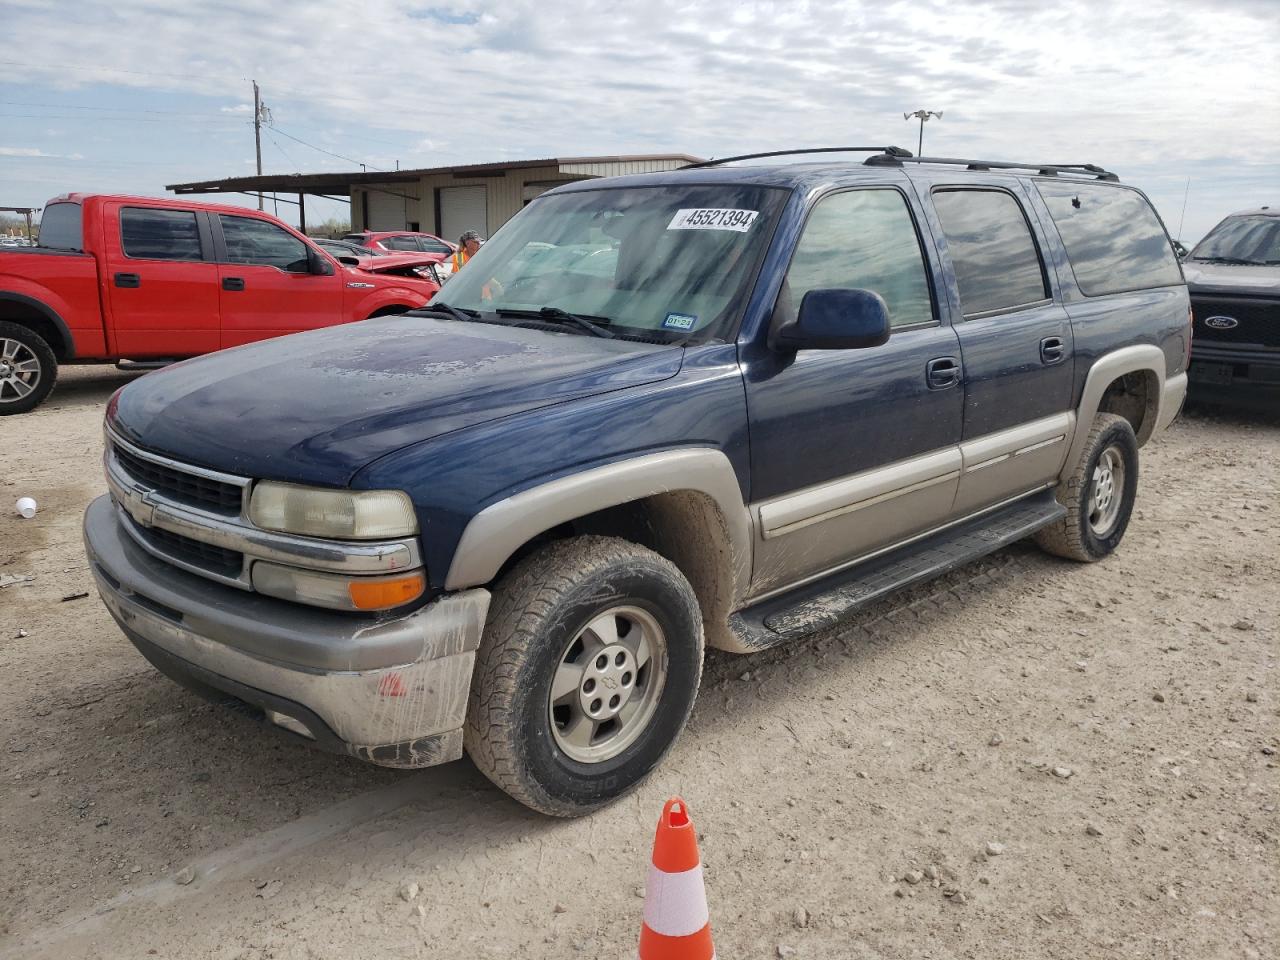 vin: 3GNEC16T71G223113 3GNEC16T71G223113 2001 chevrolet suburban 5300 for Sale in 76501 6617, Tx - Waco, Temple, USA